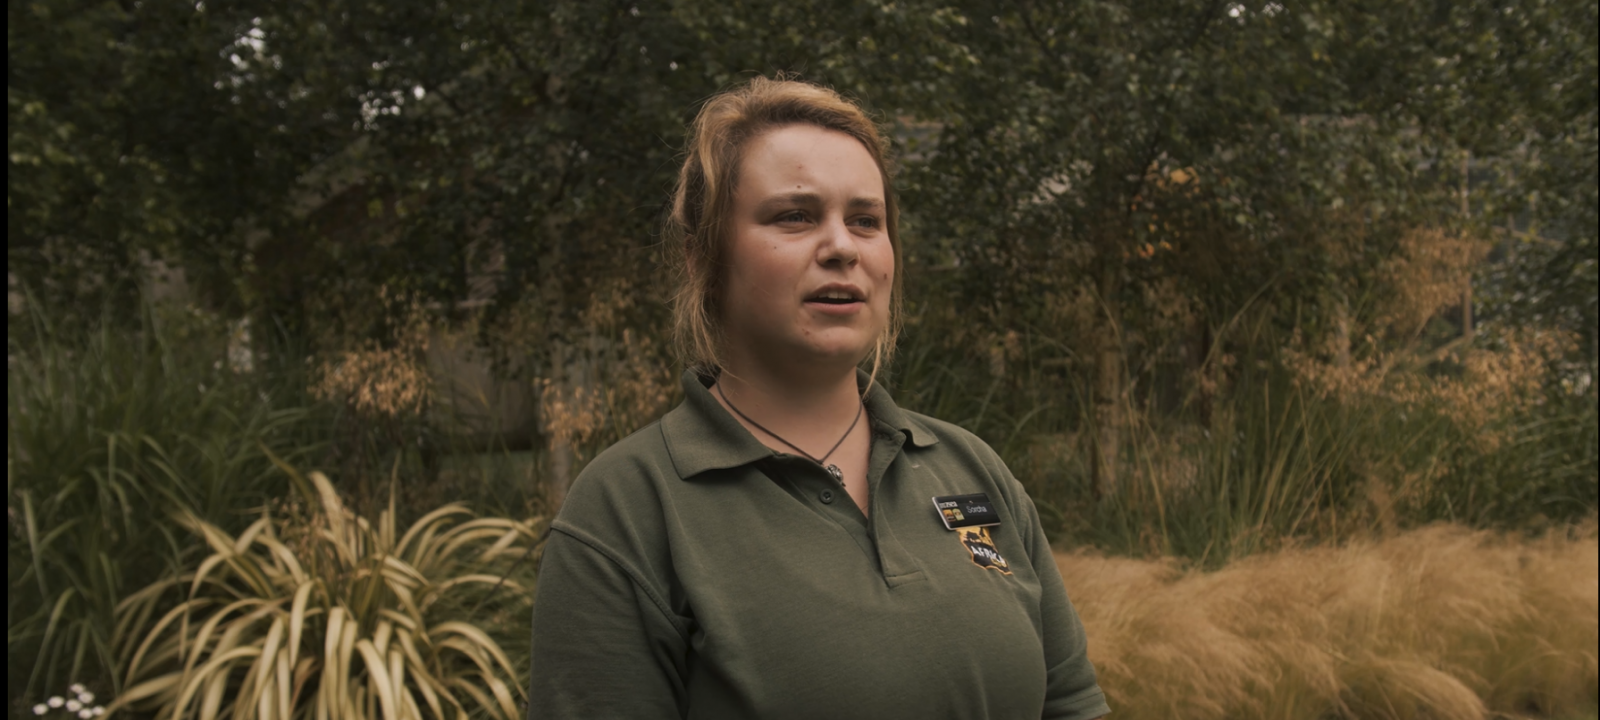 Apprentice Story: Zookeeper @ Africa Alive